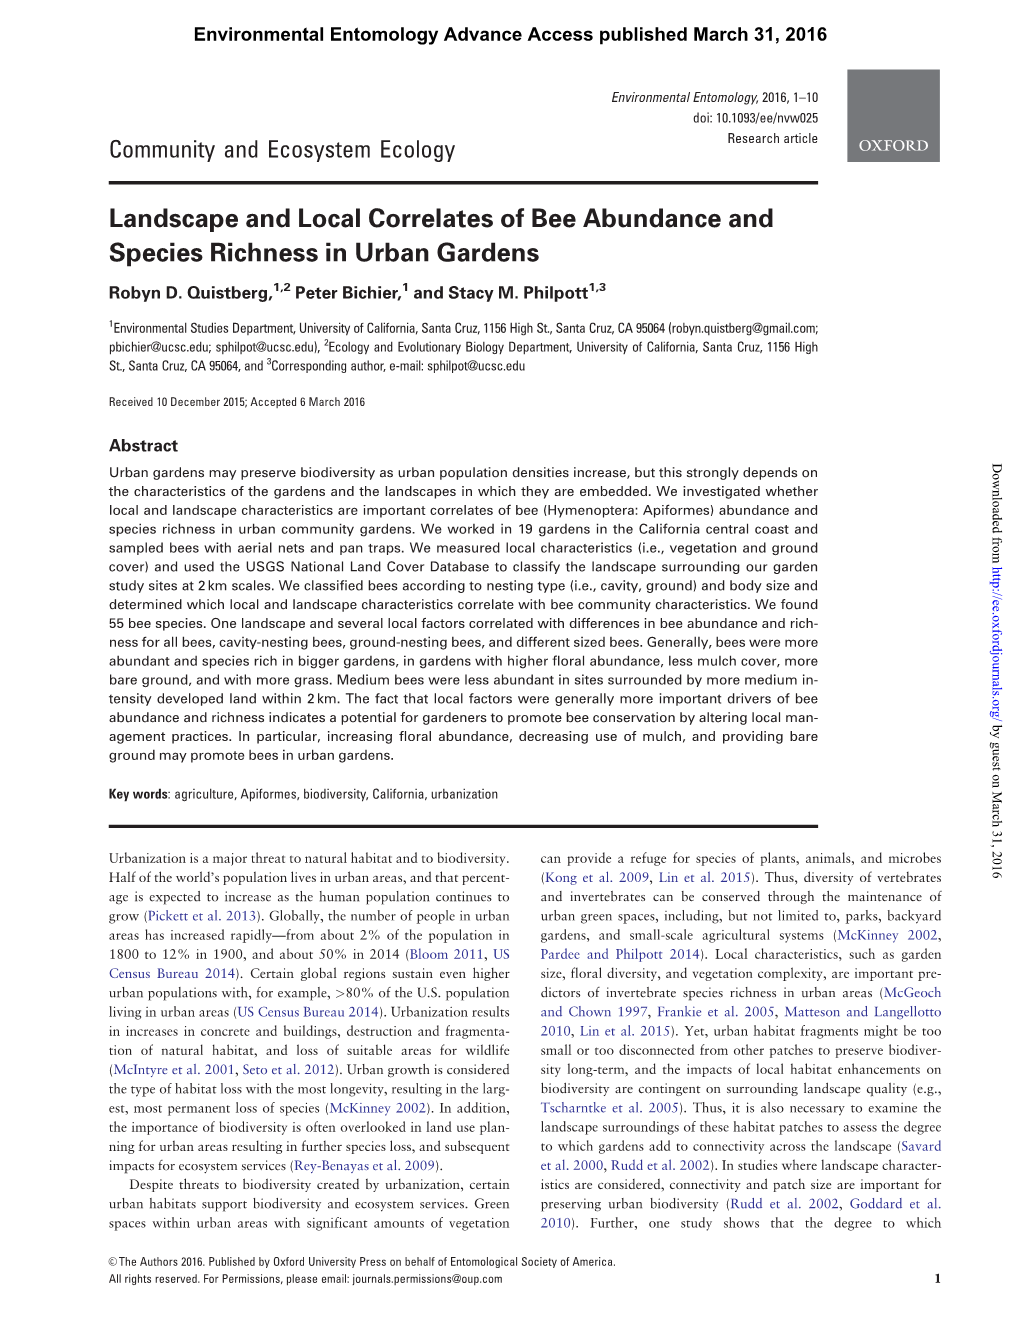 Landscape and Local Correlates of Bee Abundance and Species Richness in Urban Gardens